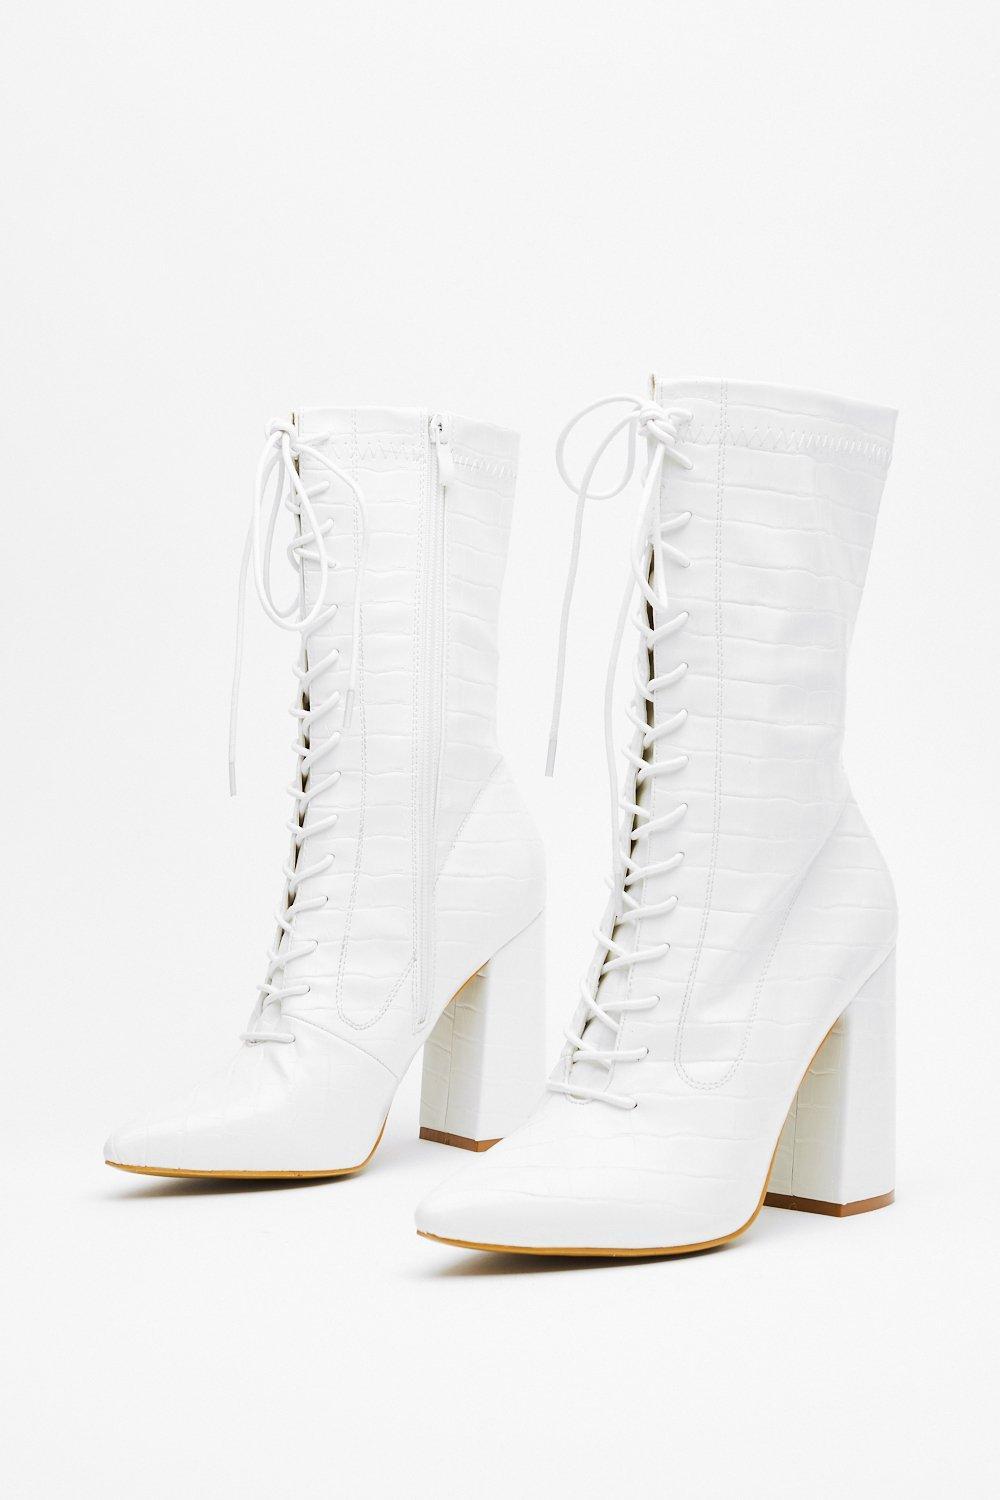 Nasty Gal Block Party Croc Heeled Boots in White | Lyst